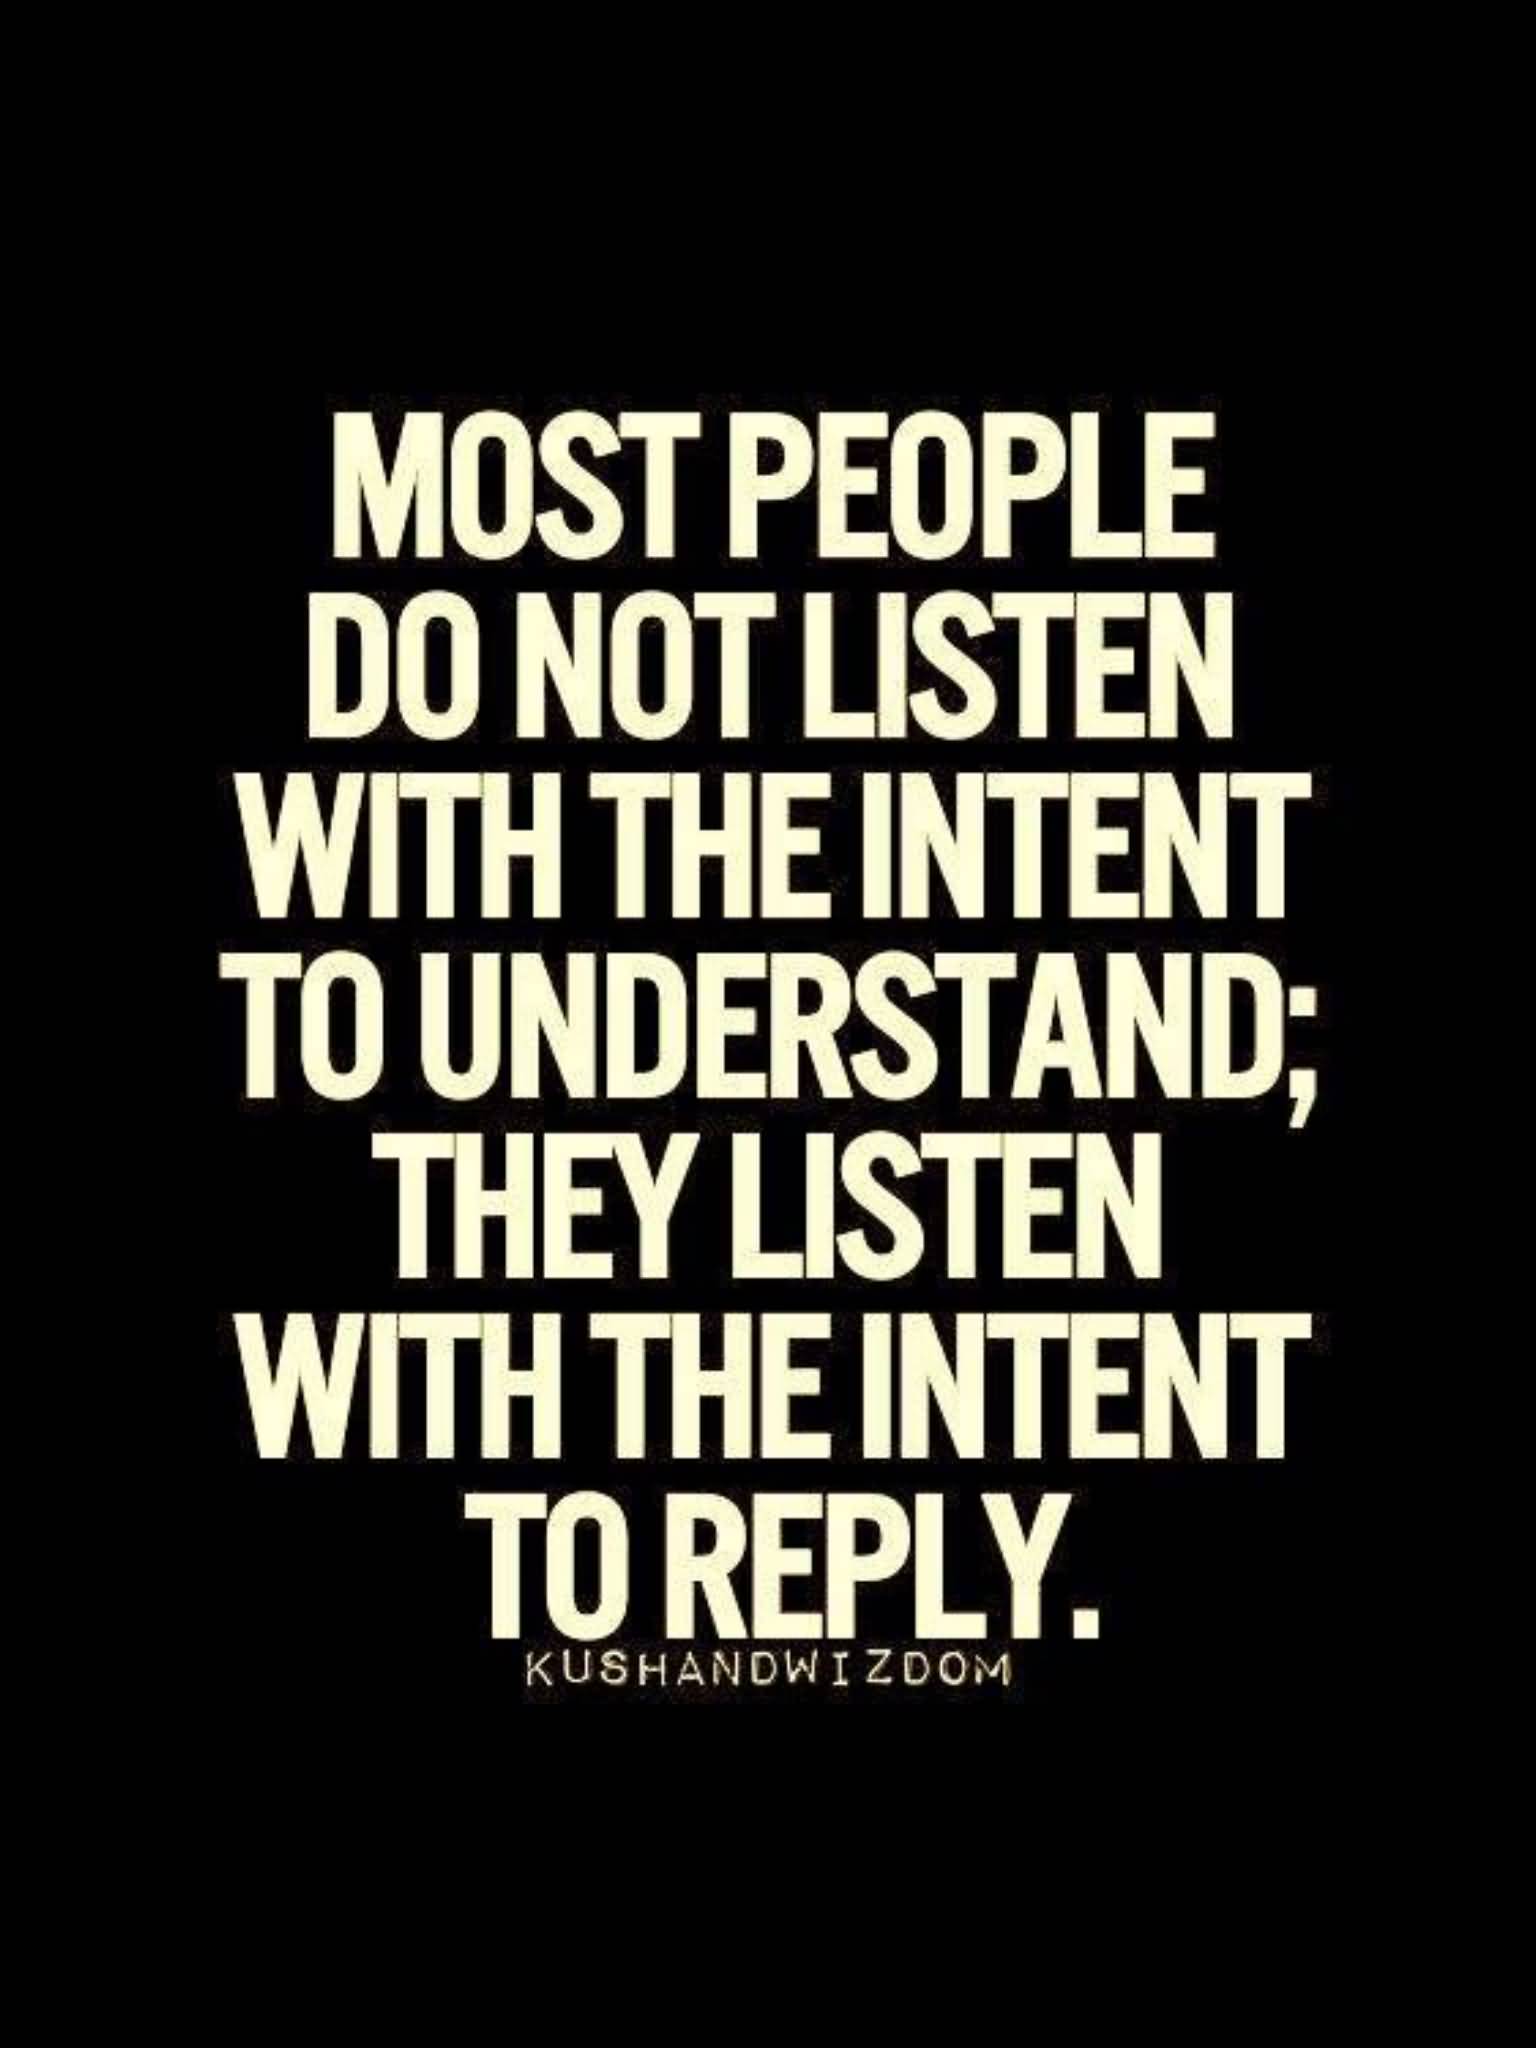 Most people do not listen with the intent to understand; they listen with the intent to reply